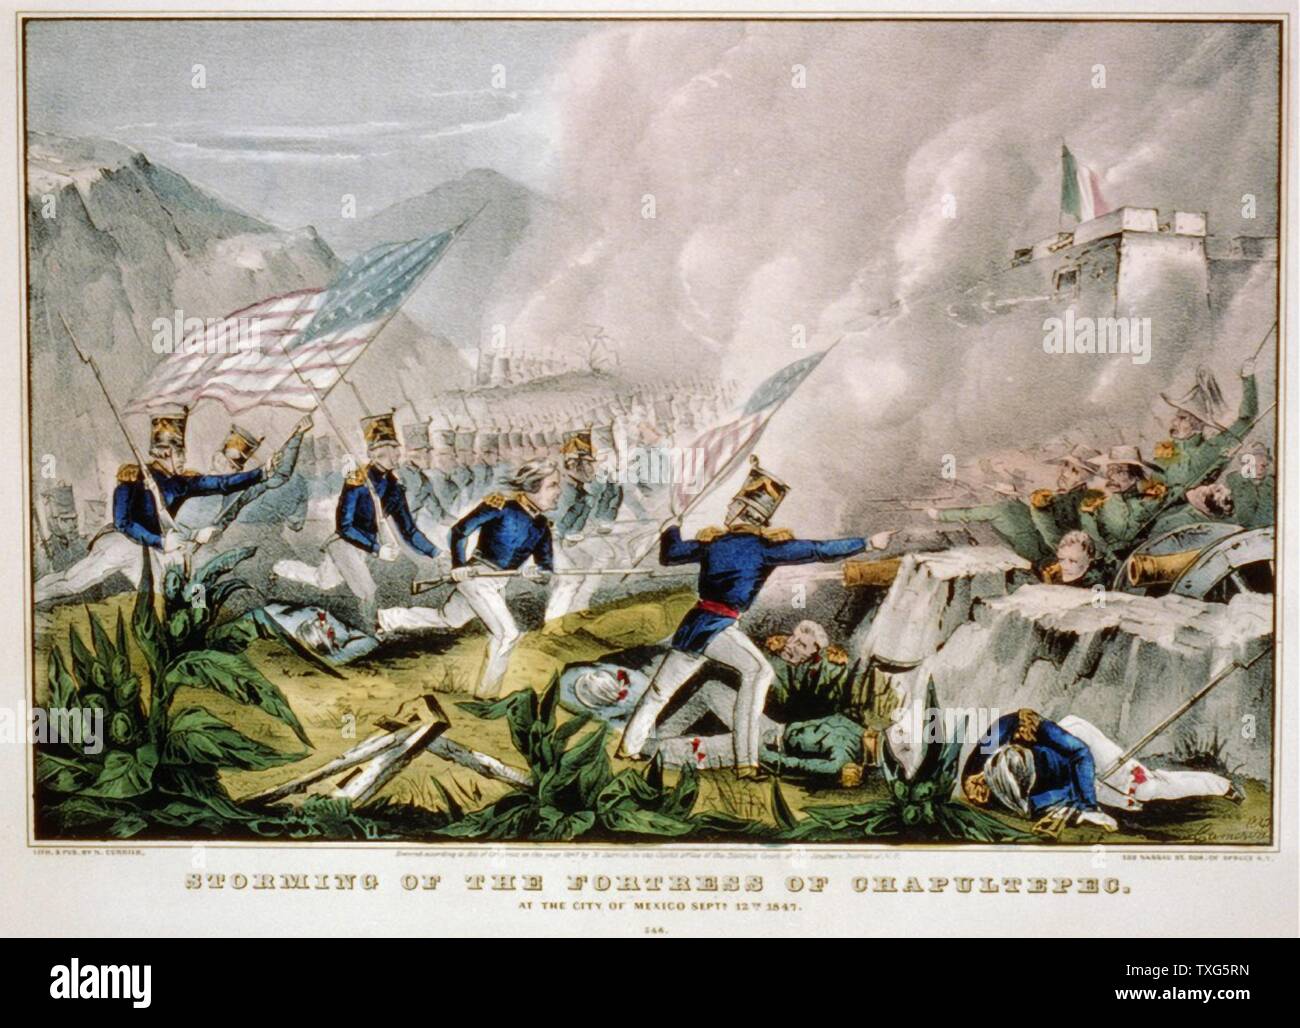 Mexican-American War 1846-1848 : US forces under Winfield Scott  storming the Fortress of Chapultepec - Mexico City Hand-coloured engraving Stock Photo